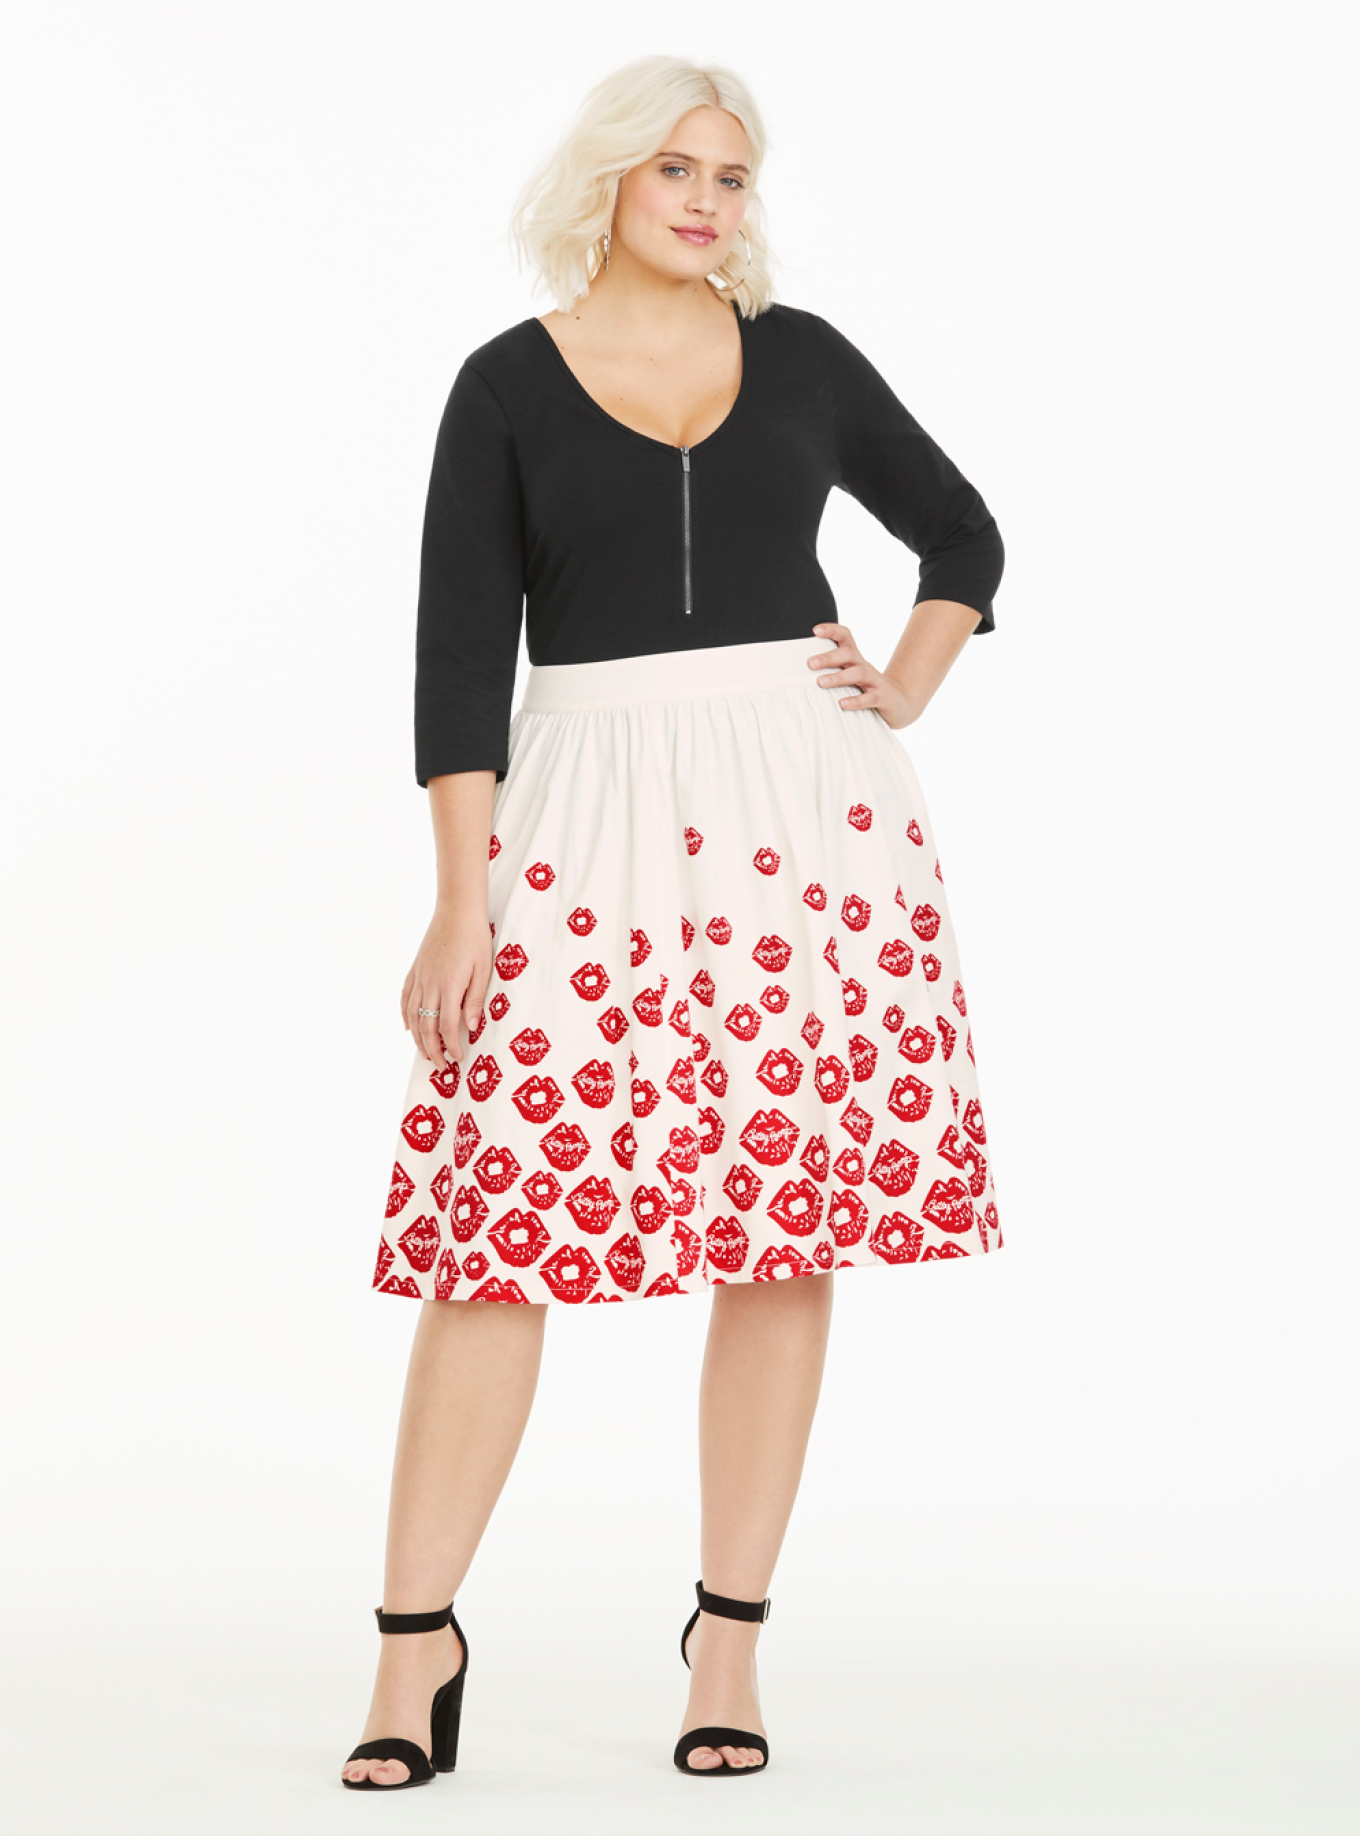 Betty Boop-Inpsired Five-Piece Collection at Torrid from 